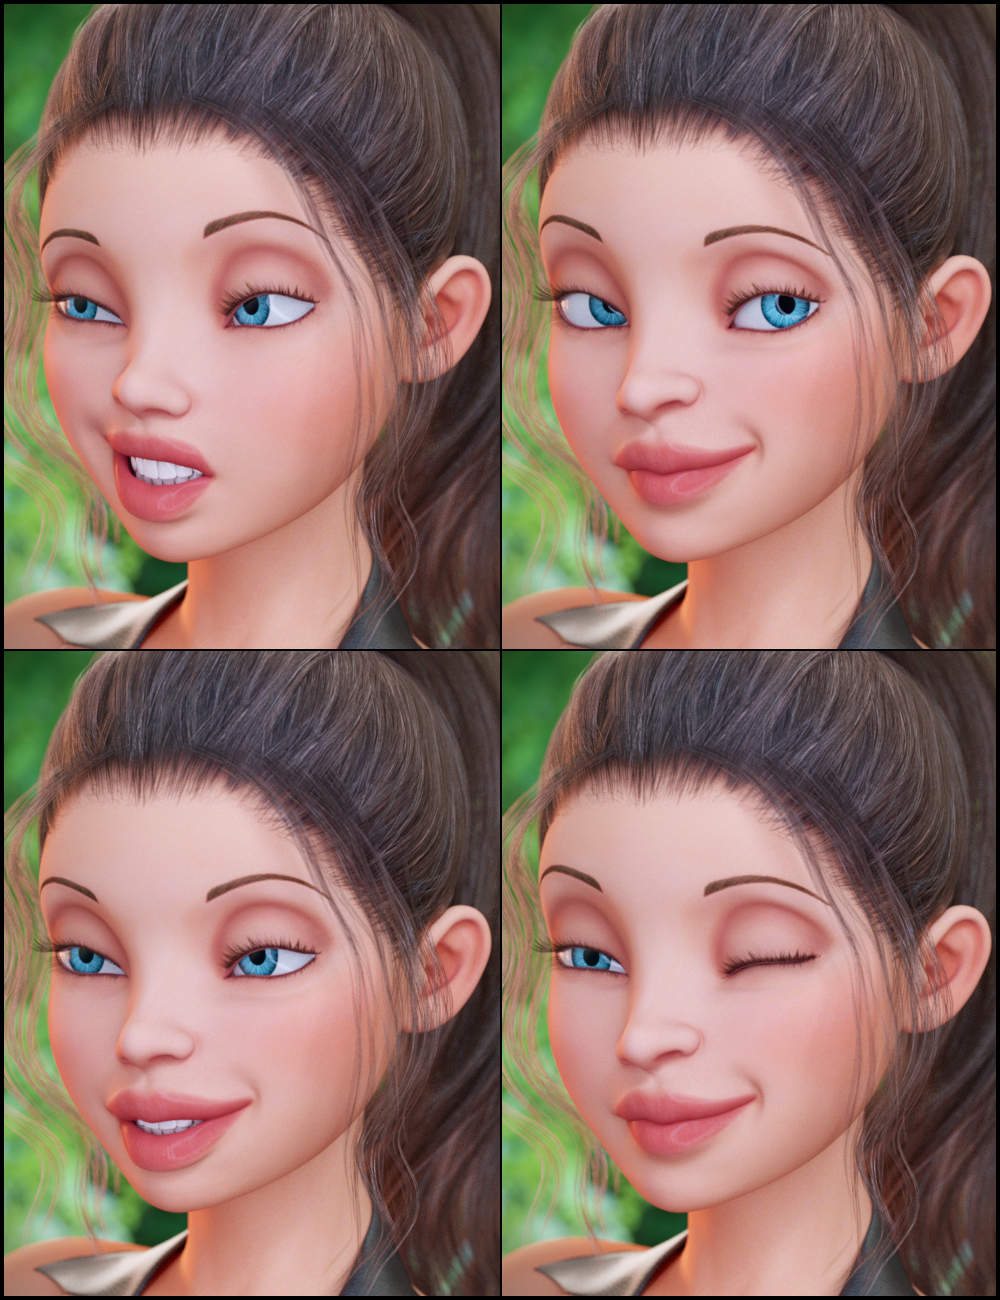 Capsces Tooned Expressions for The Girl 7 by: Capsces Digital Ink, 3D Models by Daz 3D